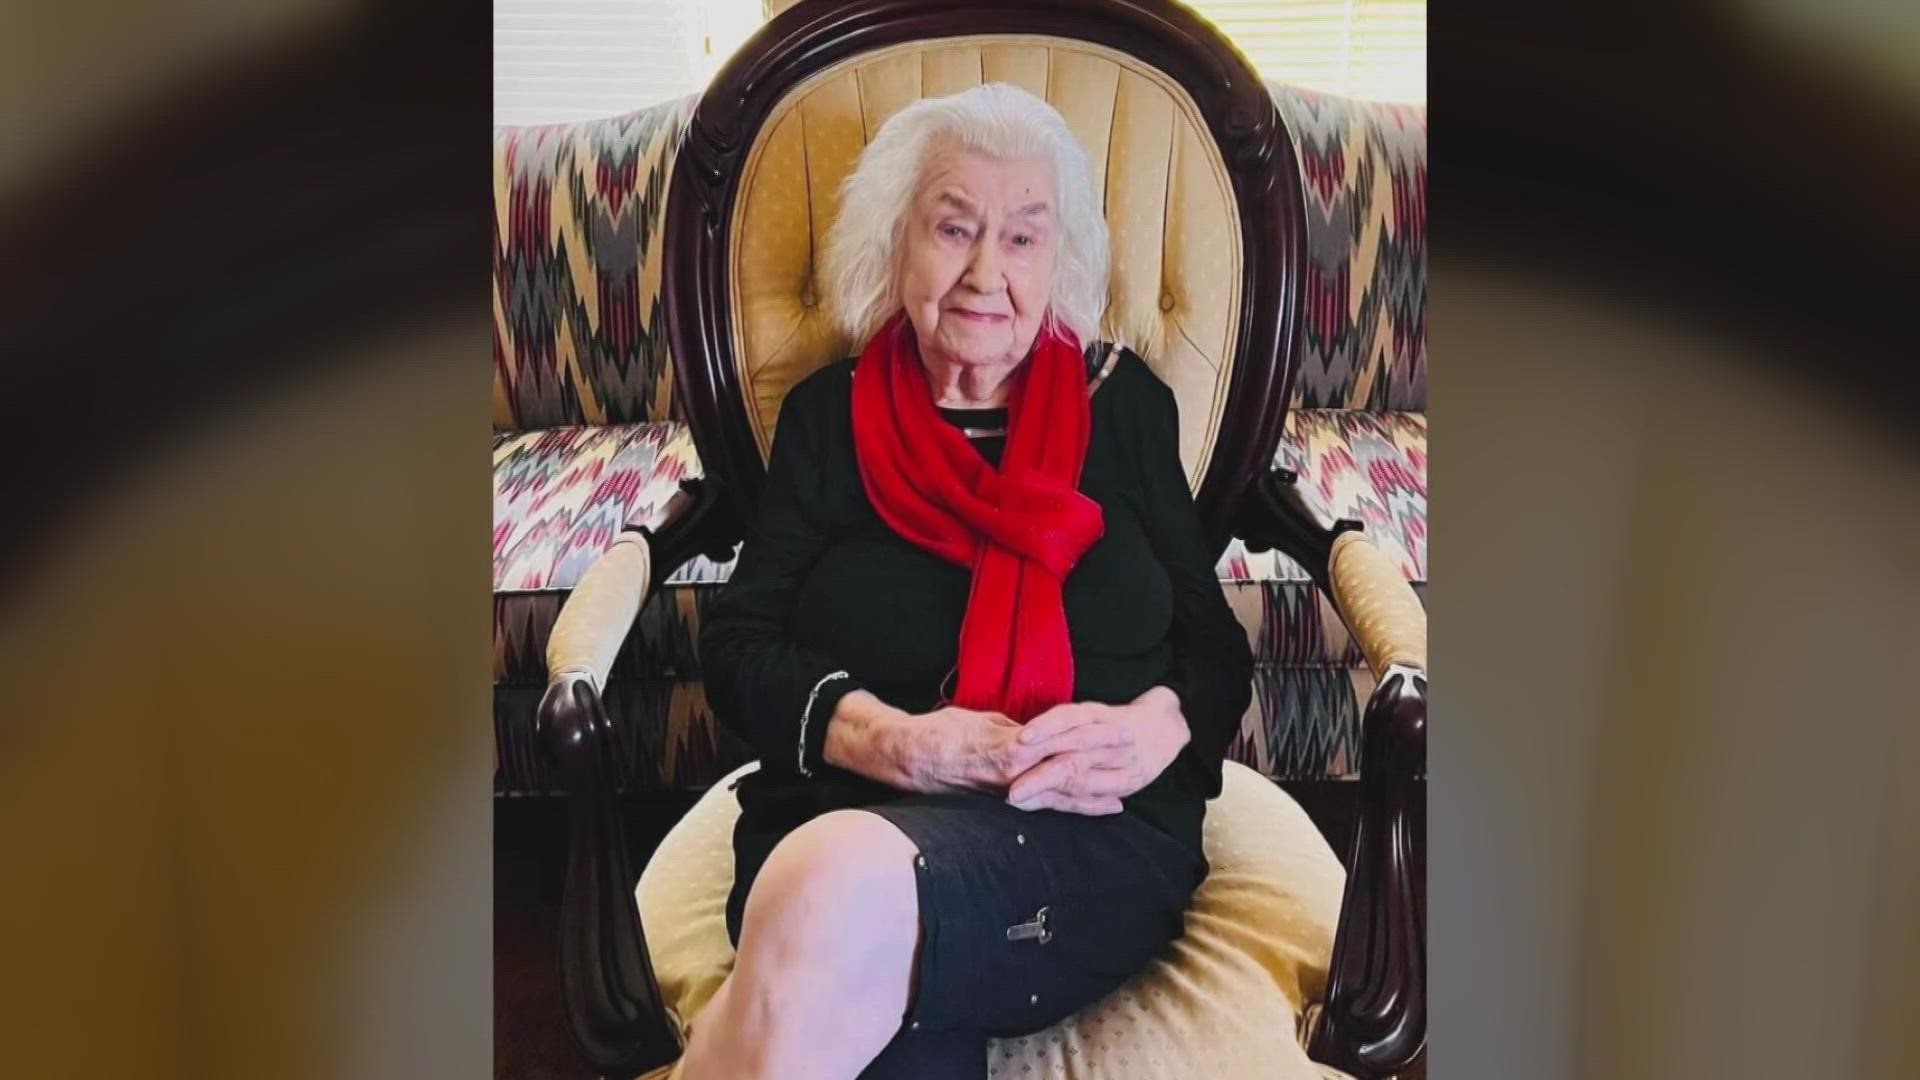 Louisville woman dubbed 'Louisville's Queen' turns 101 years young